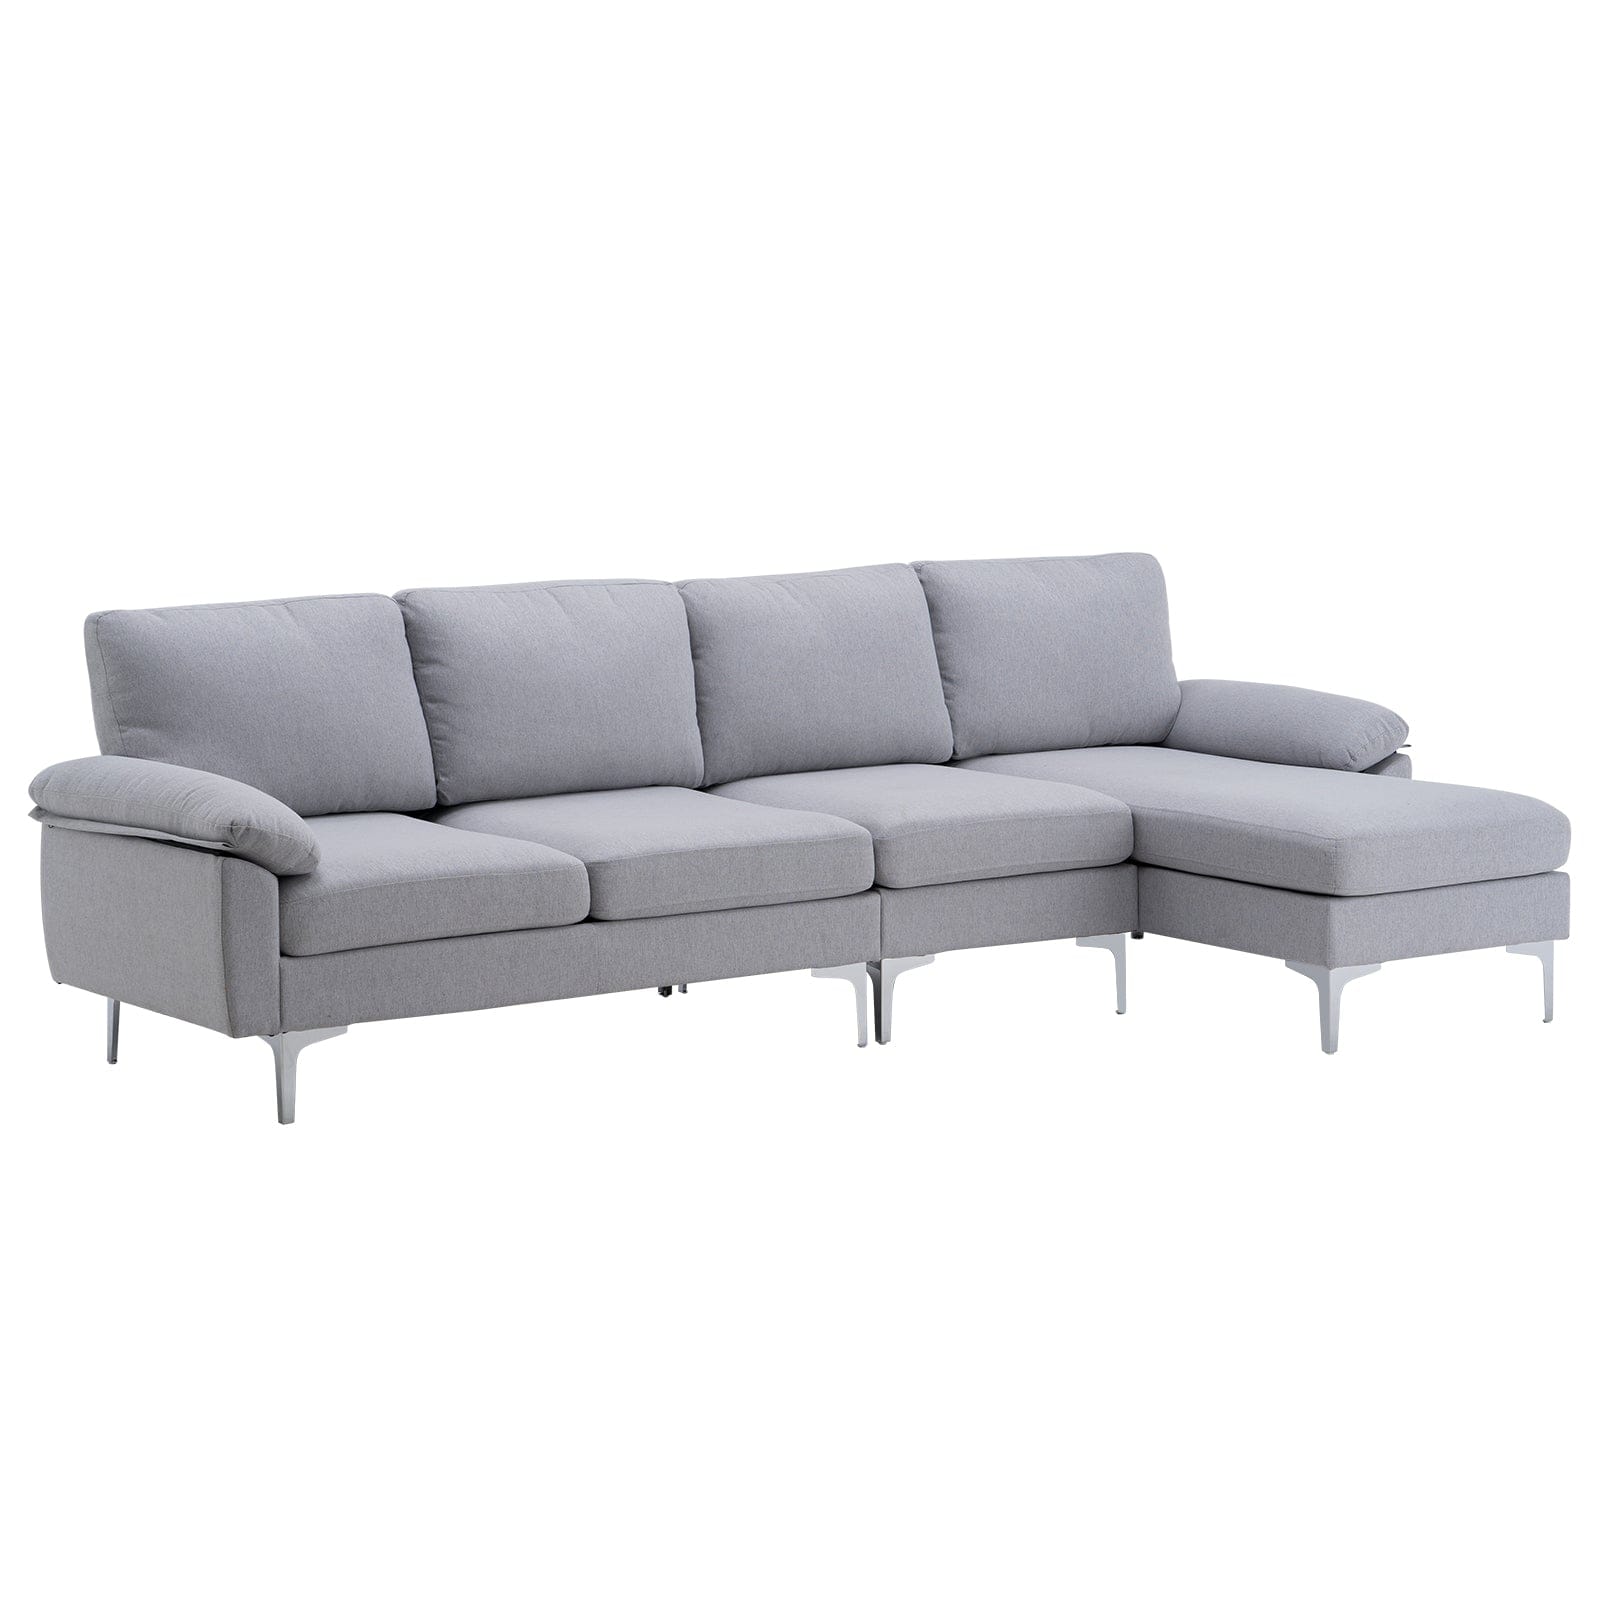 290*137*85cm L-Shaped Fabric With Chaise Iron Feet 4 Seats Indoor Modular Sofa Light Gray - HomeRelaxOfficial